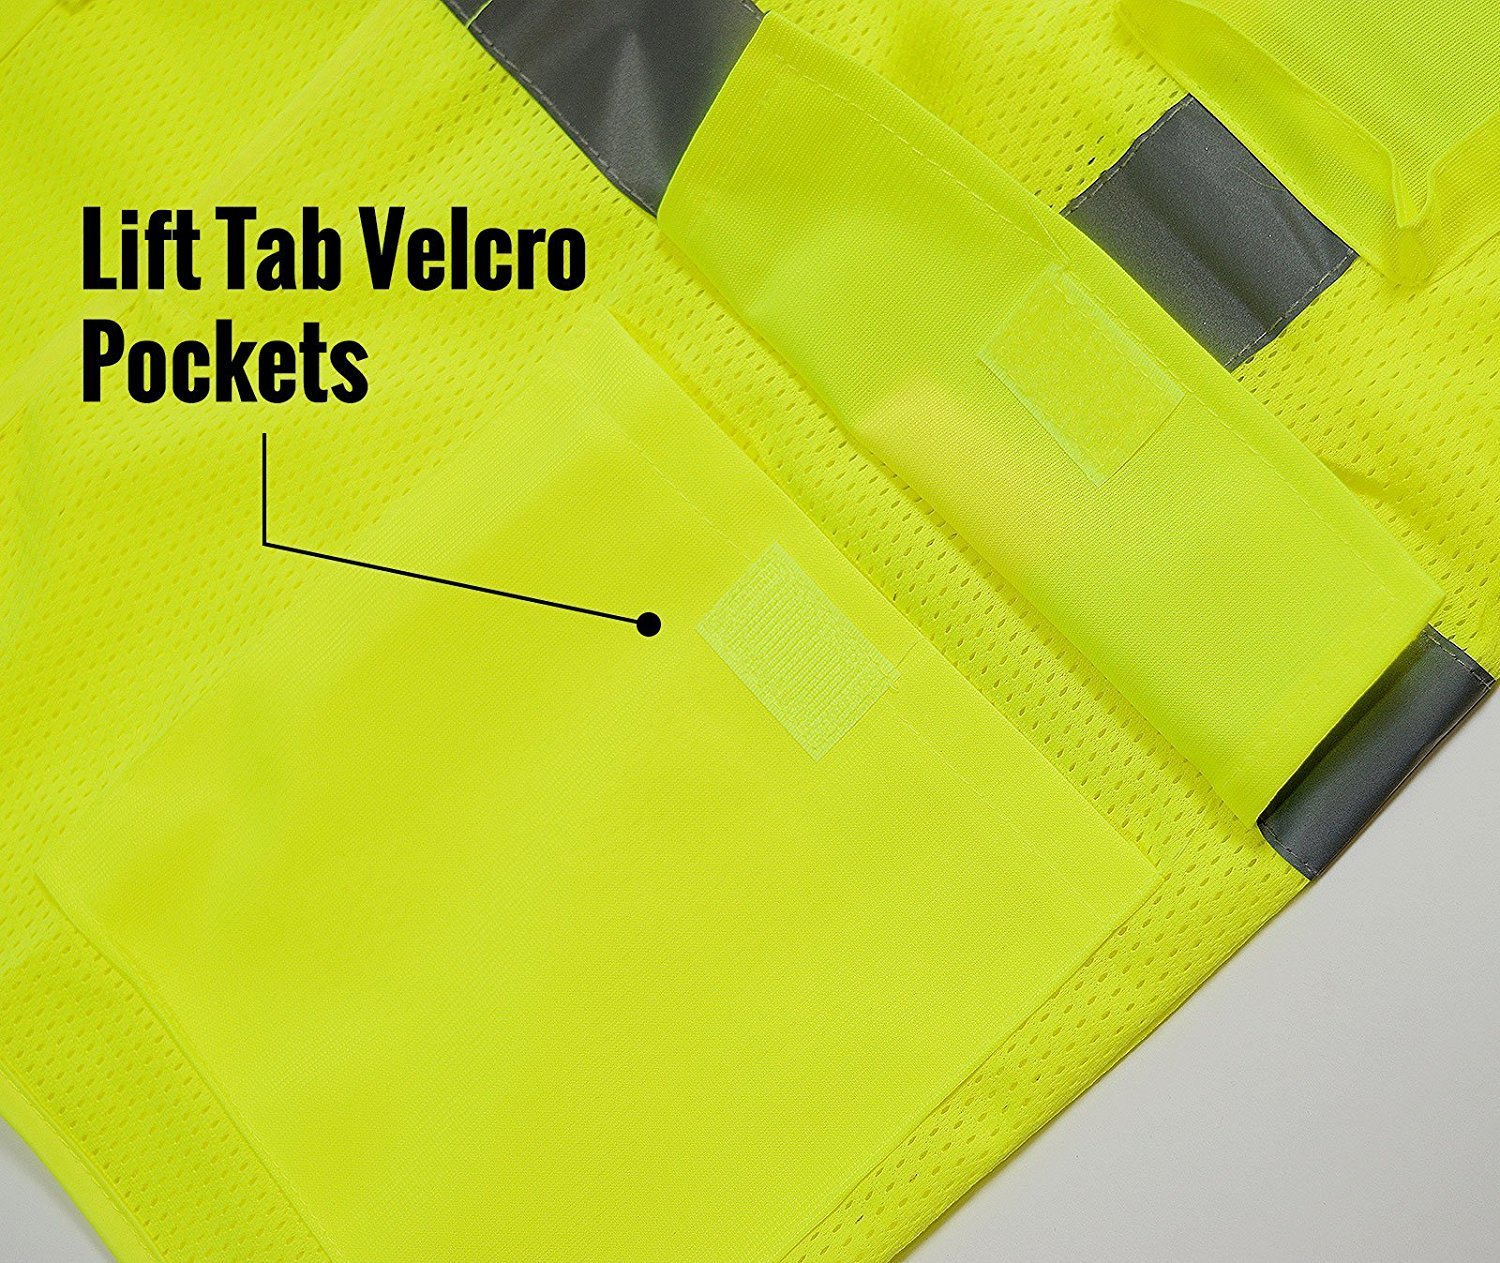 RK Safety High Visibility Safety Vest with Reflective Strips and Pockets  ANSI Class Neon Yellow 5XL